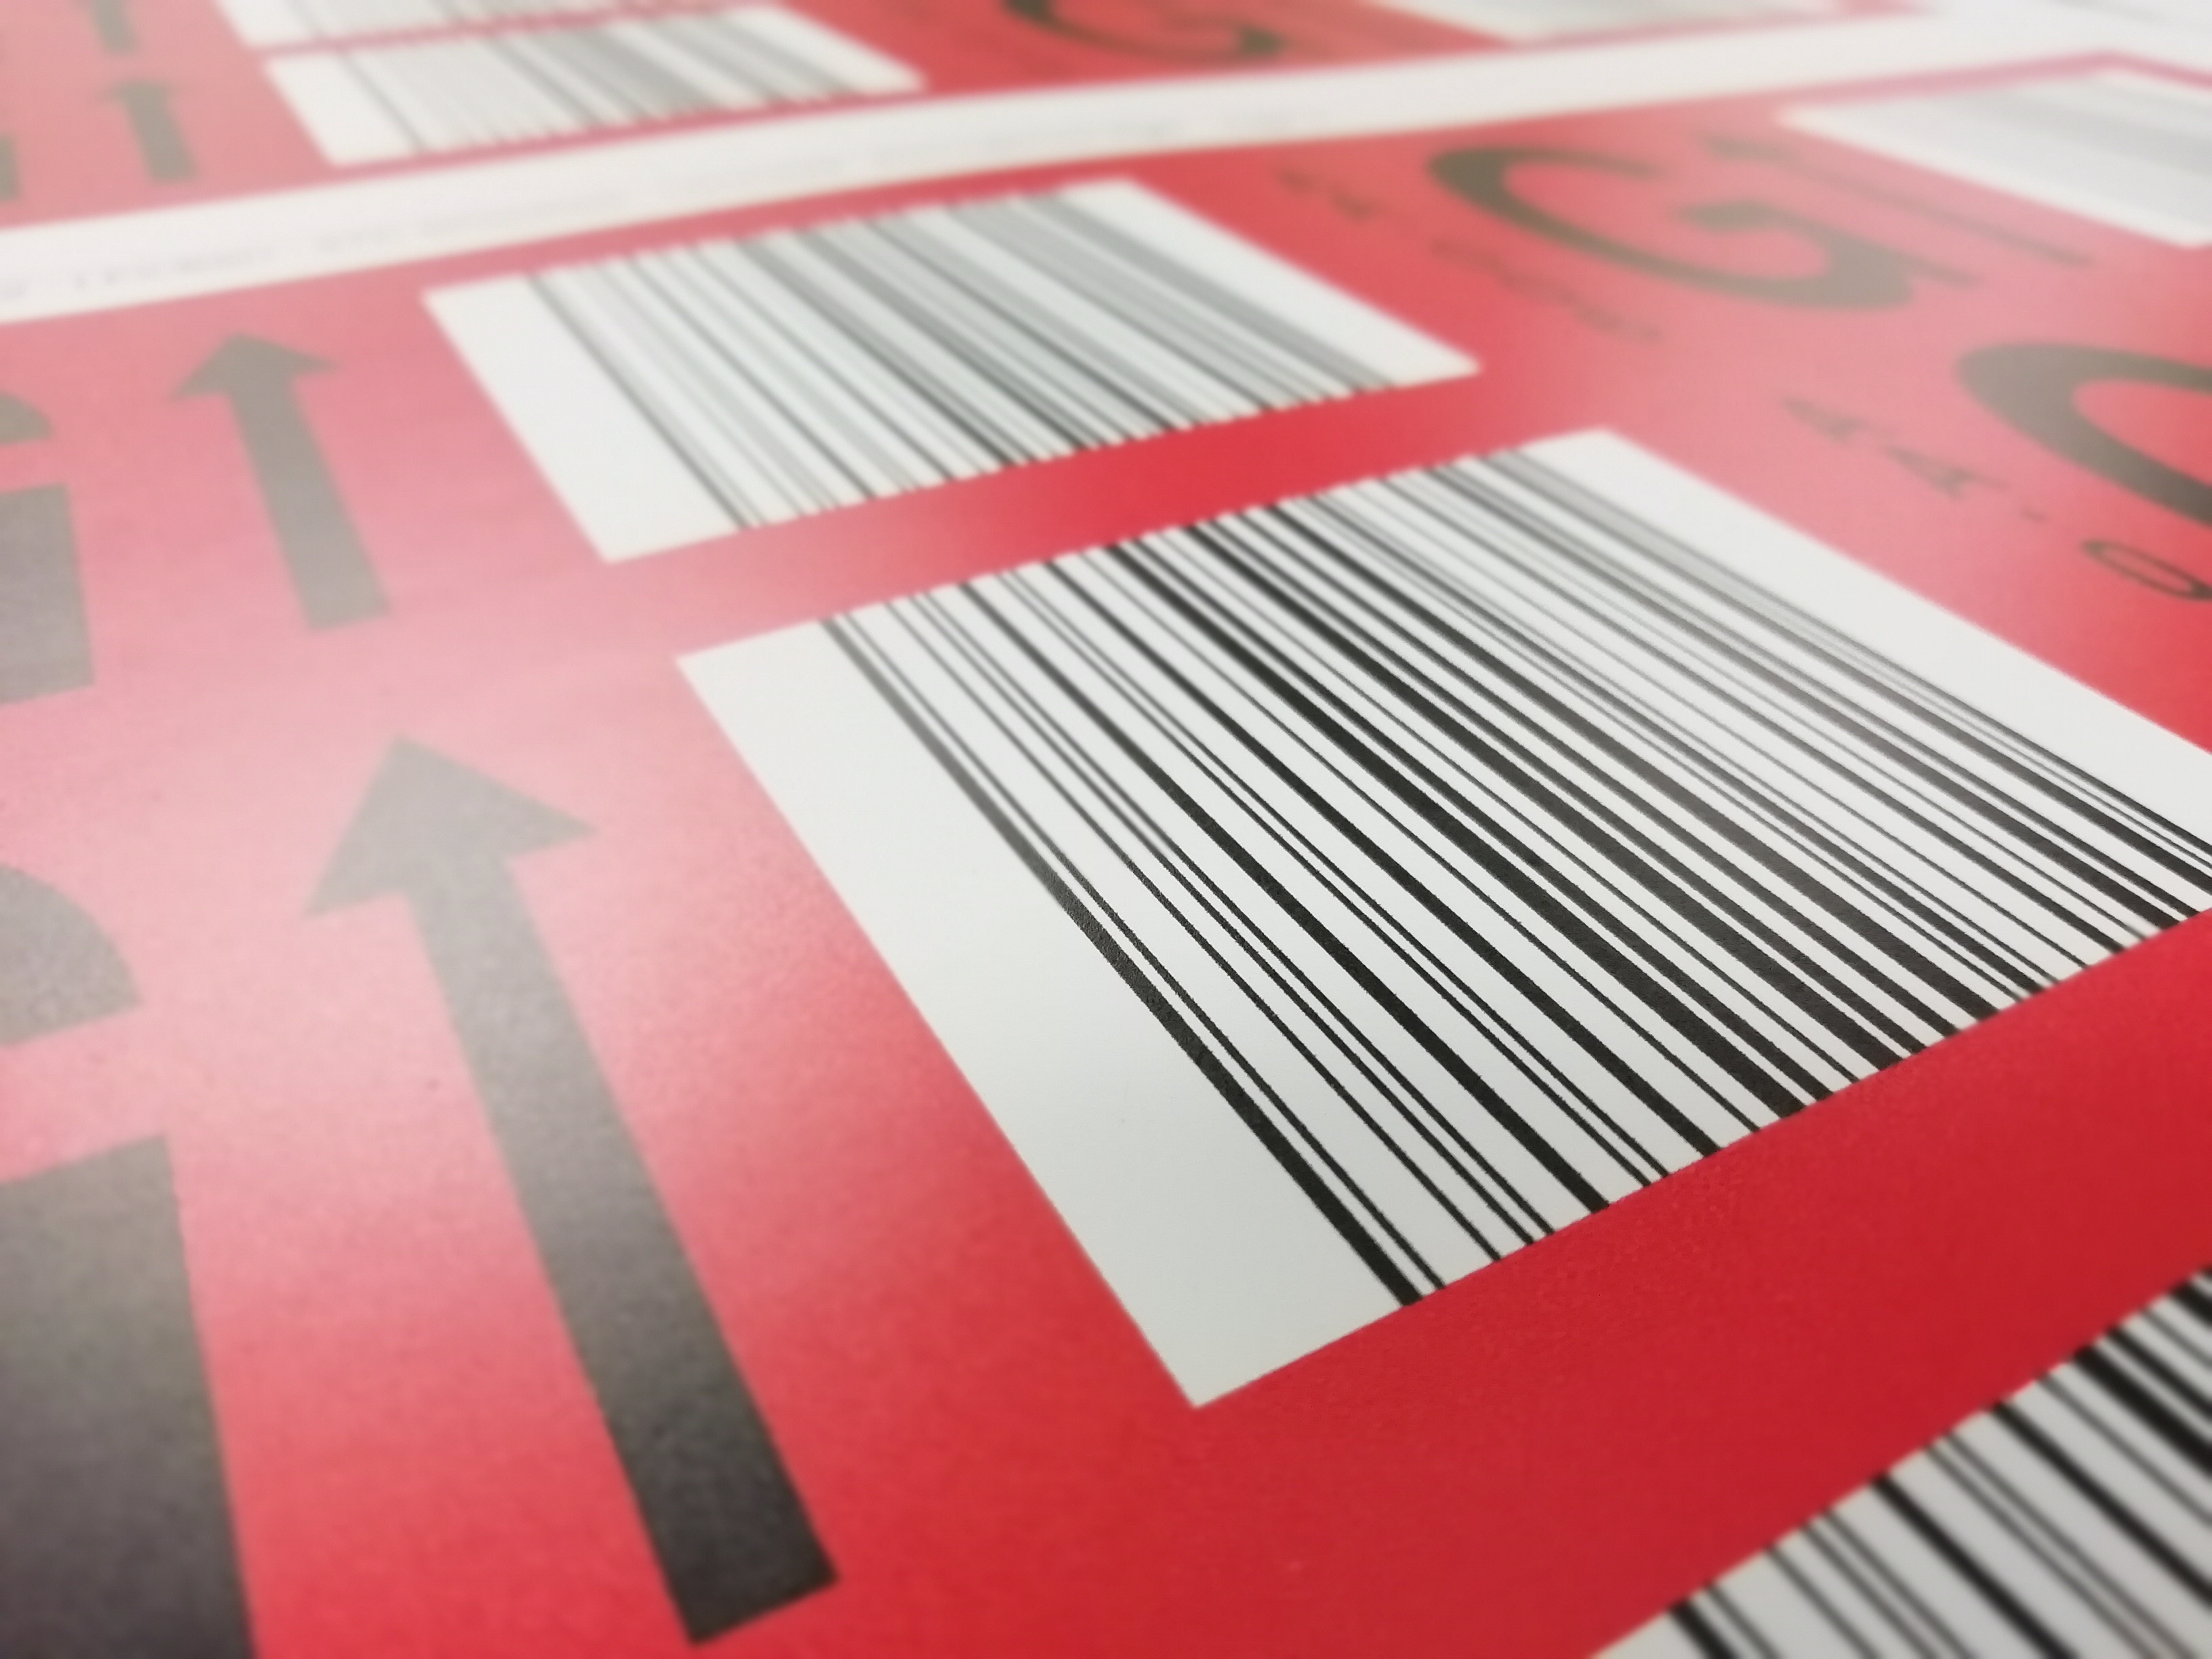 Identification labels printed with barcodes